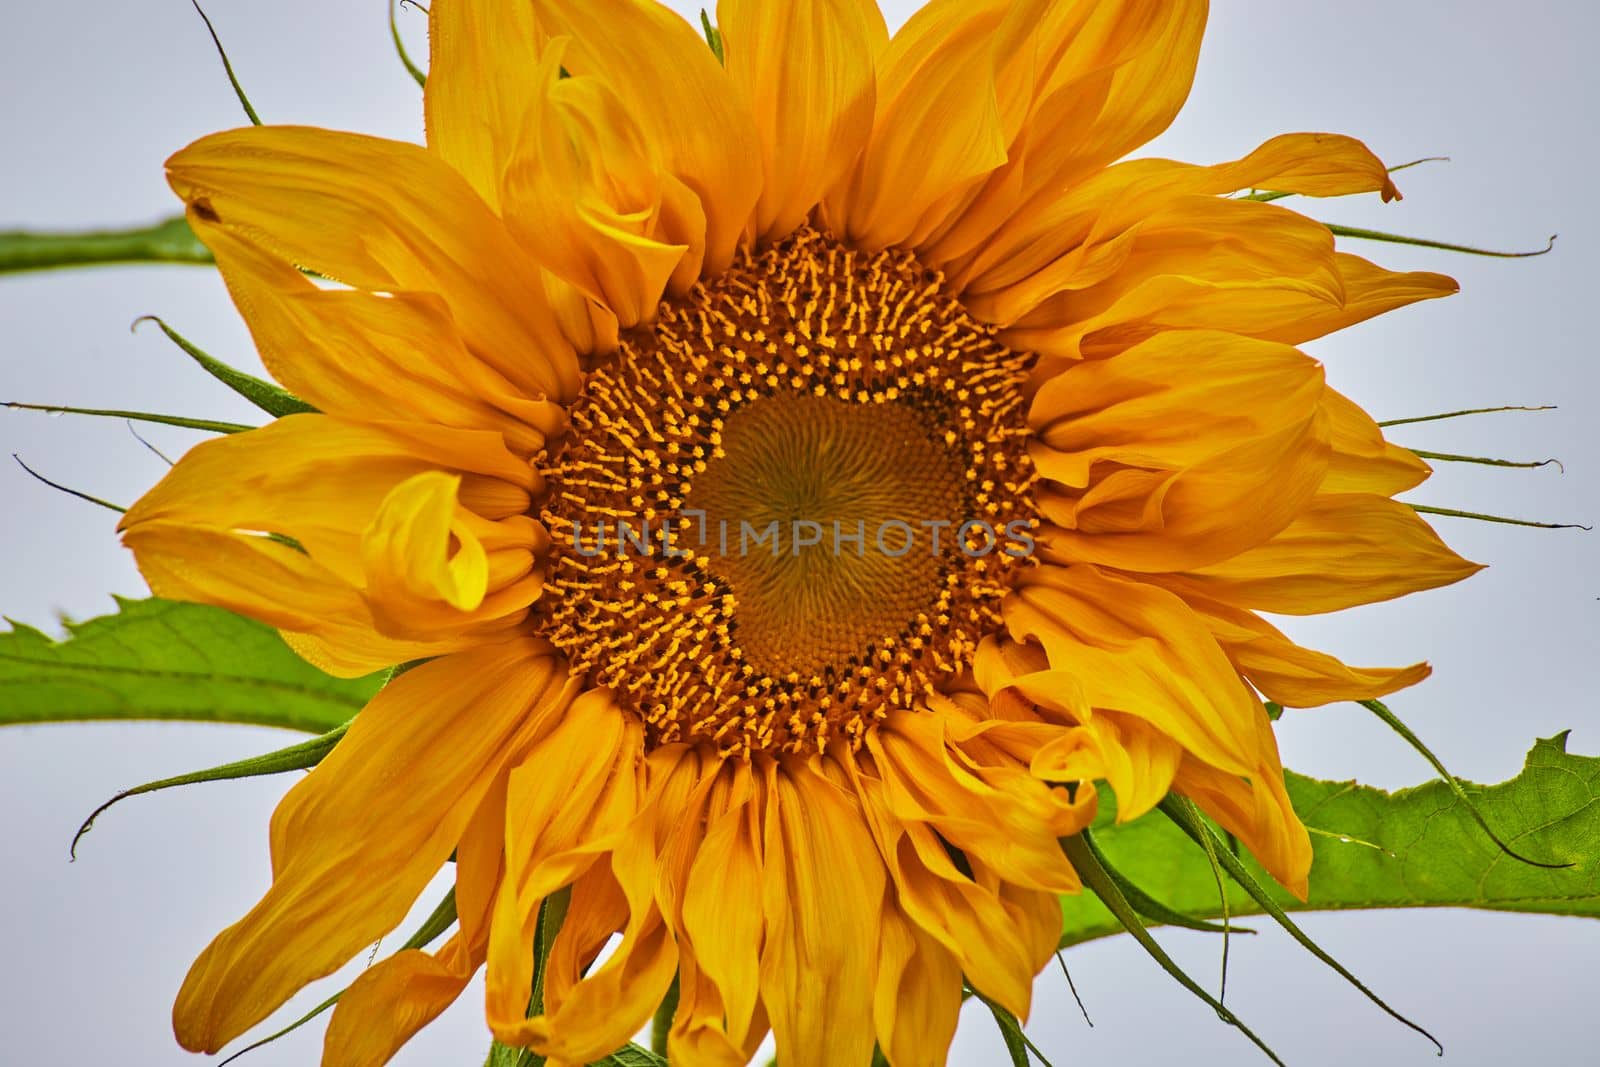 Up close to sunflower in soft morning light with foggy background by njproductions